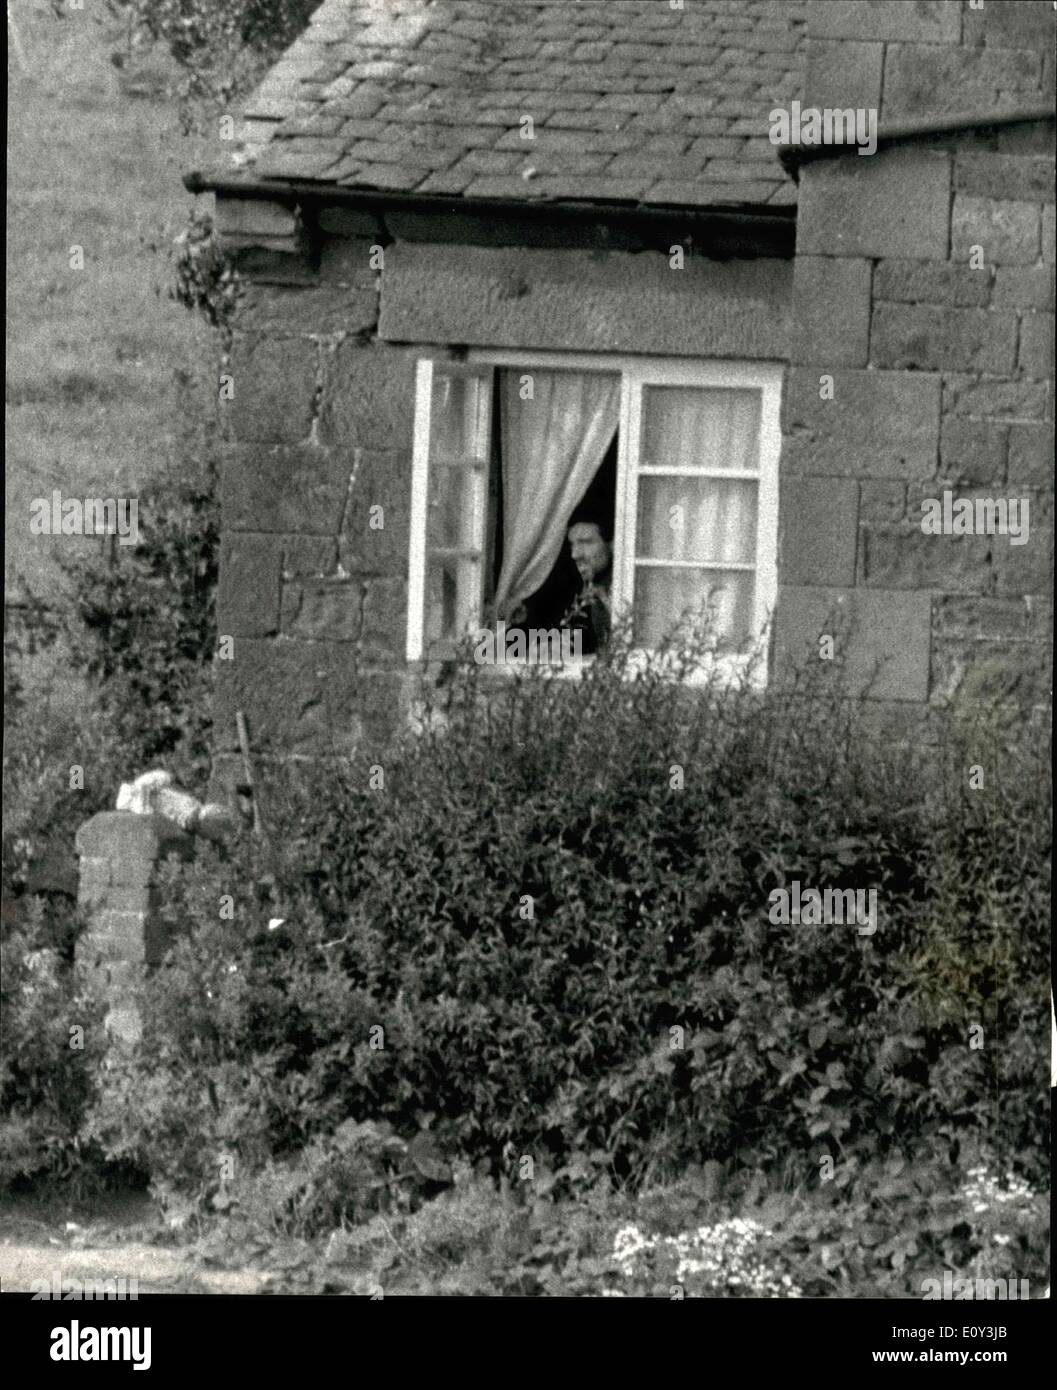 Sep. 24, 1968 - Gunman emerges from besieged cottage to collect food.: John James, the Shropshire gunman besieged in his cottage at Weston-under-Red castle emerged fir the first time yesterday to collect groceries from. He carried his shotguns under his arms. James walked six paces to an outhouse wall and collected loaf of bread, a tin of luncheon meat, butter and water left by Mr. To Hedlington, his brother in law. He turned and went inside. it is now six days since James barricade himself in the cottage with his wife, Joyce and four young children Stock Photo